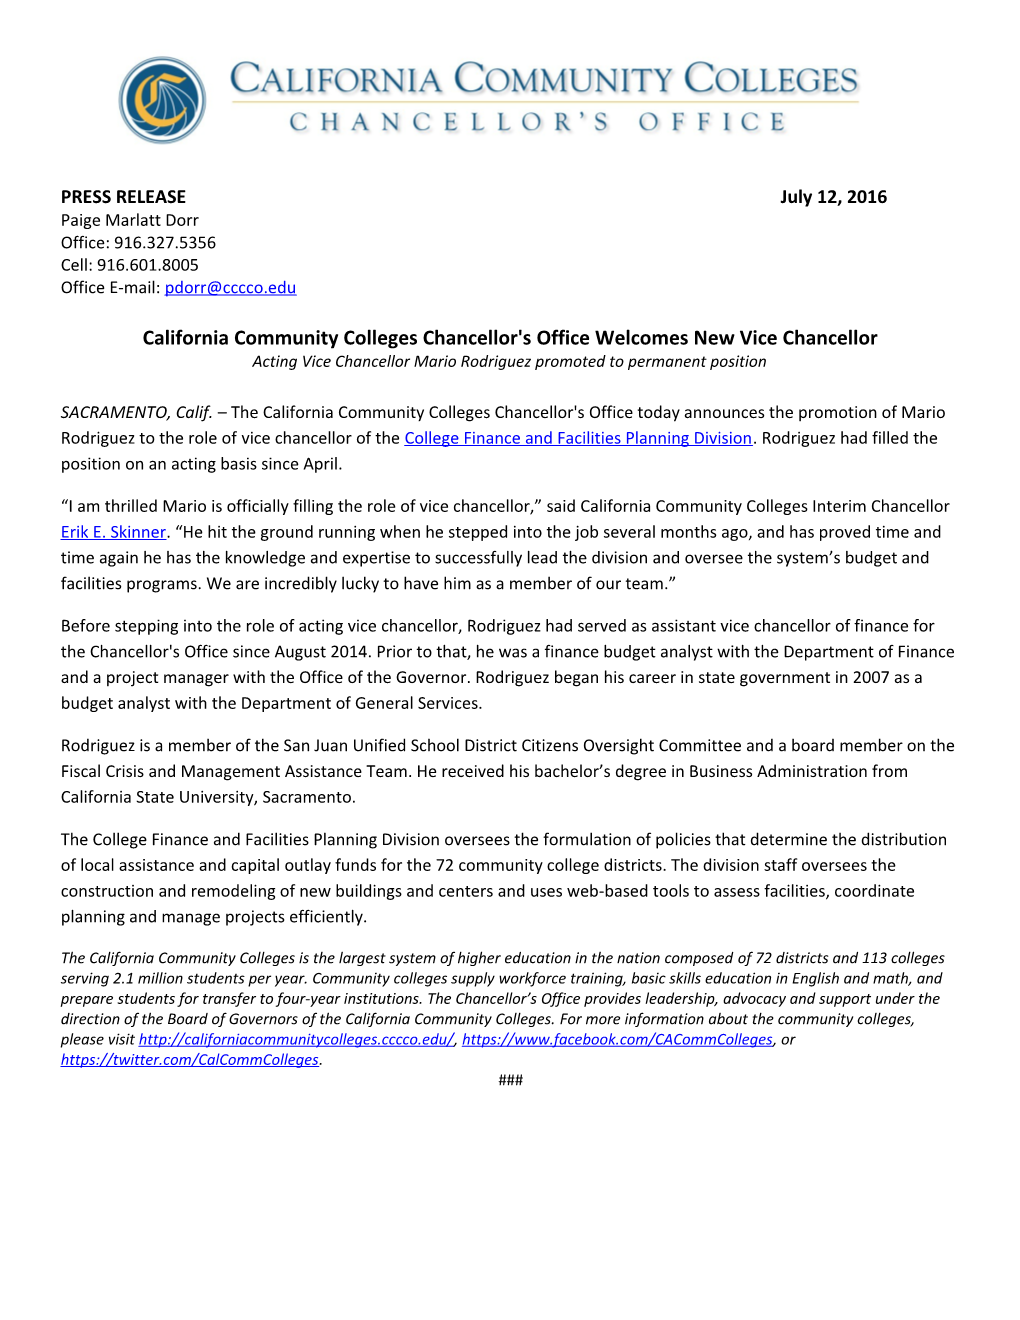 California Community Colleges Chancellor's Office Welcomes New Vice Chancellor